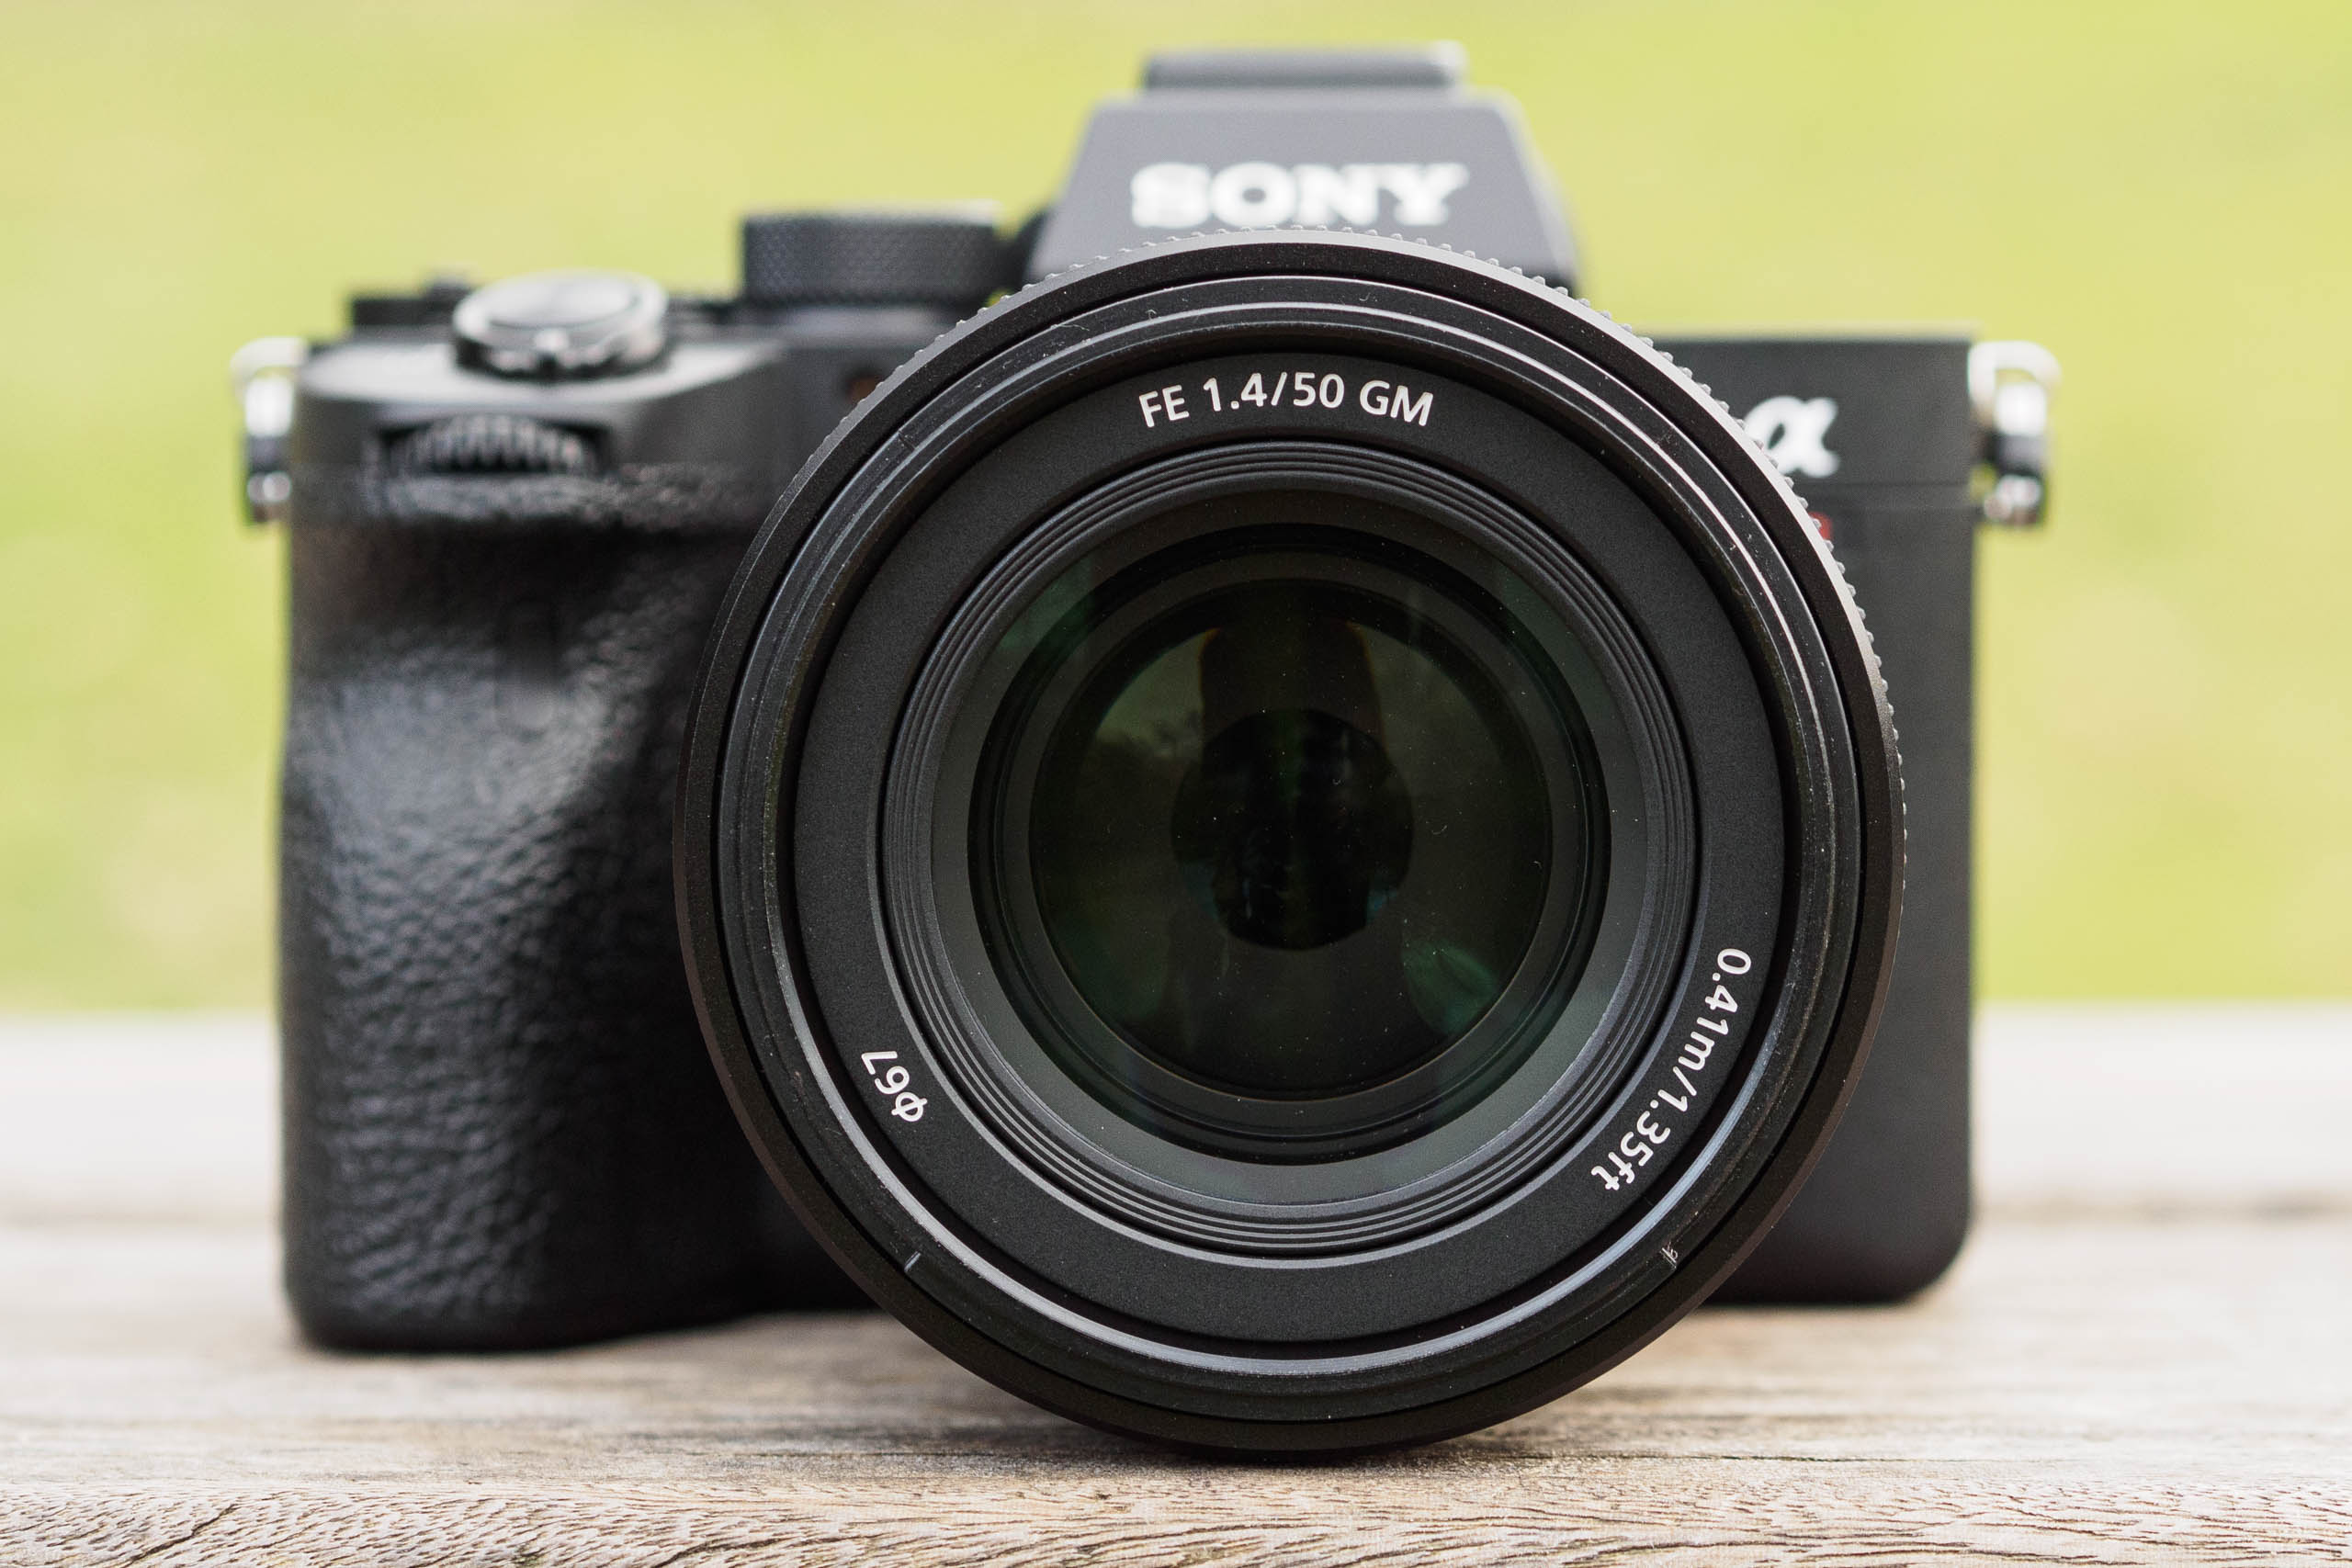 3 Sony 35mm Lenses Compared - BEST value revealed!